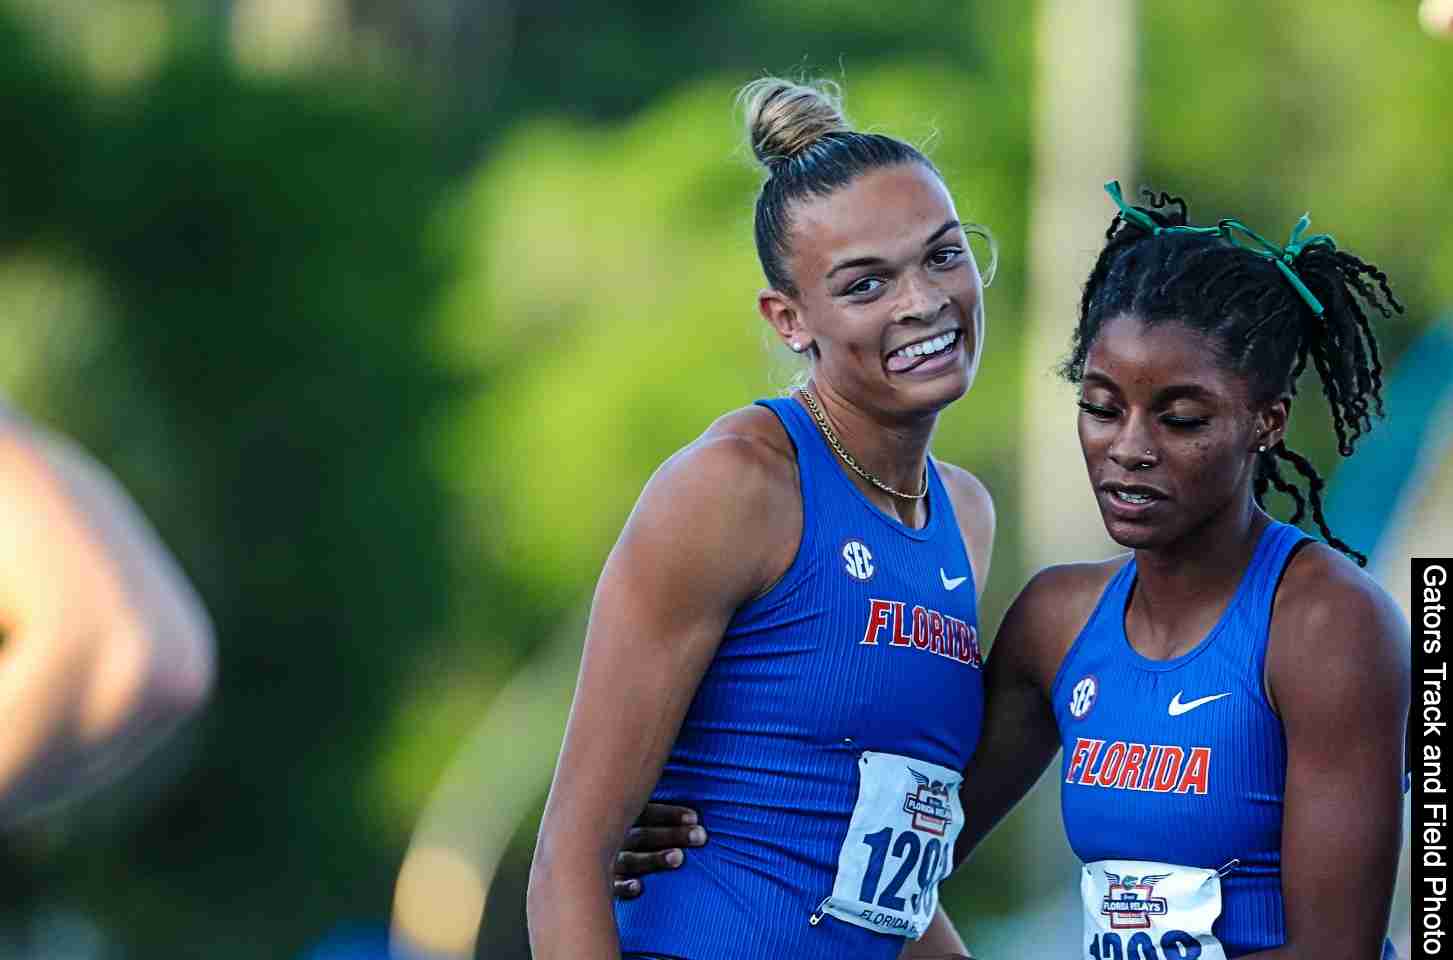 Florida jumps to No. 3; Texas remains No. 1 – USTFCCCA Week 2 outdoor rankings